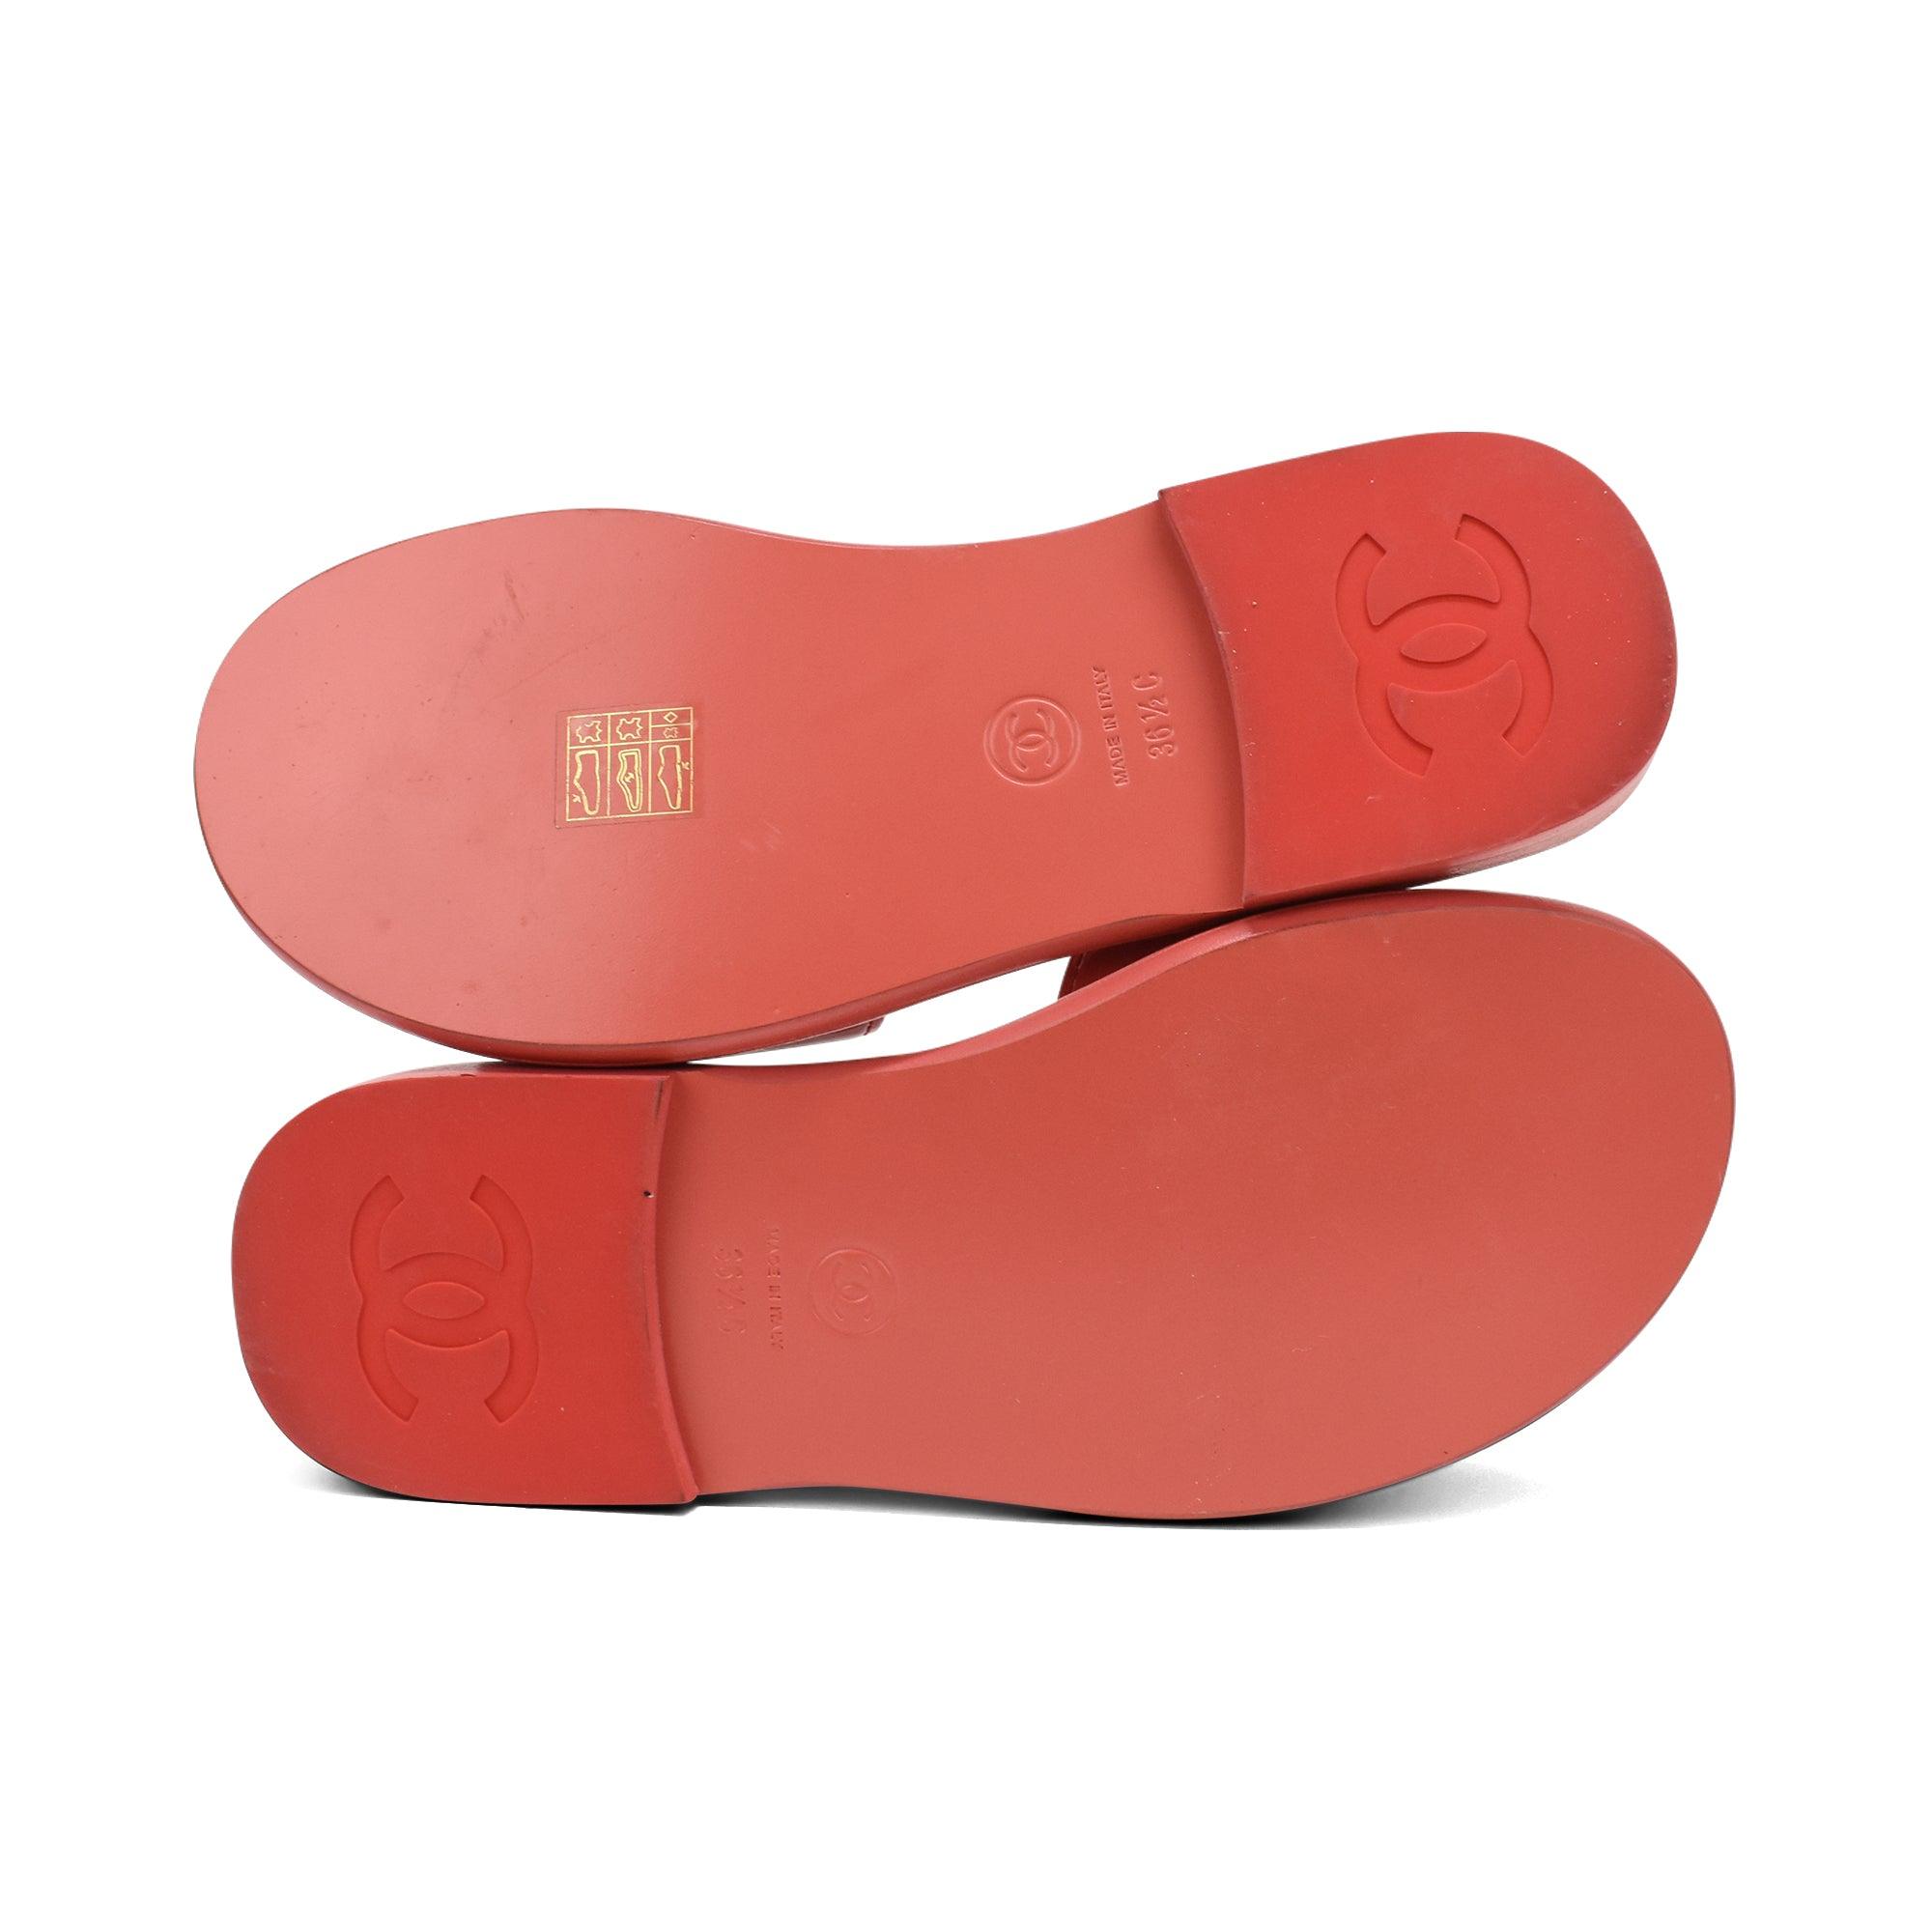 Chanel Sandals - Women's 36.5 - Fashionably Yours